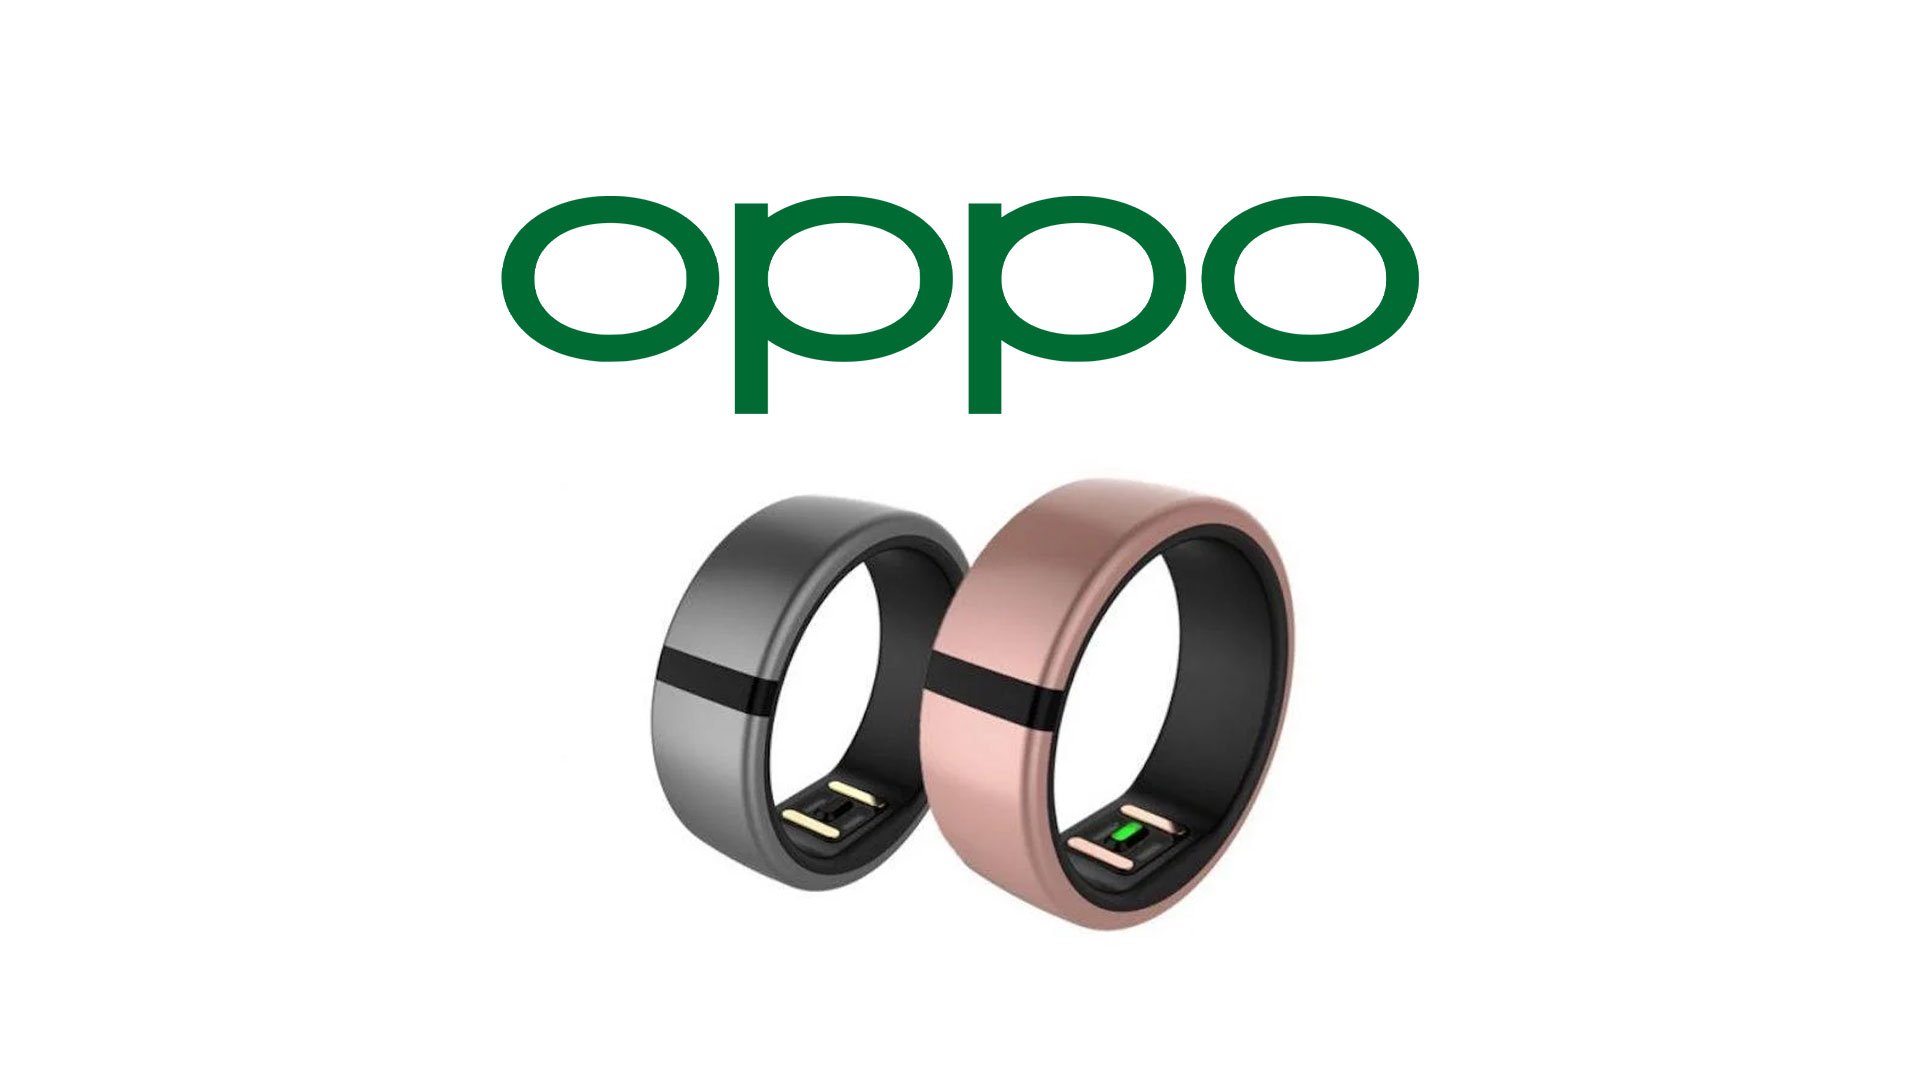 OPPO patented a new wearable device